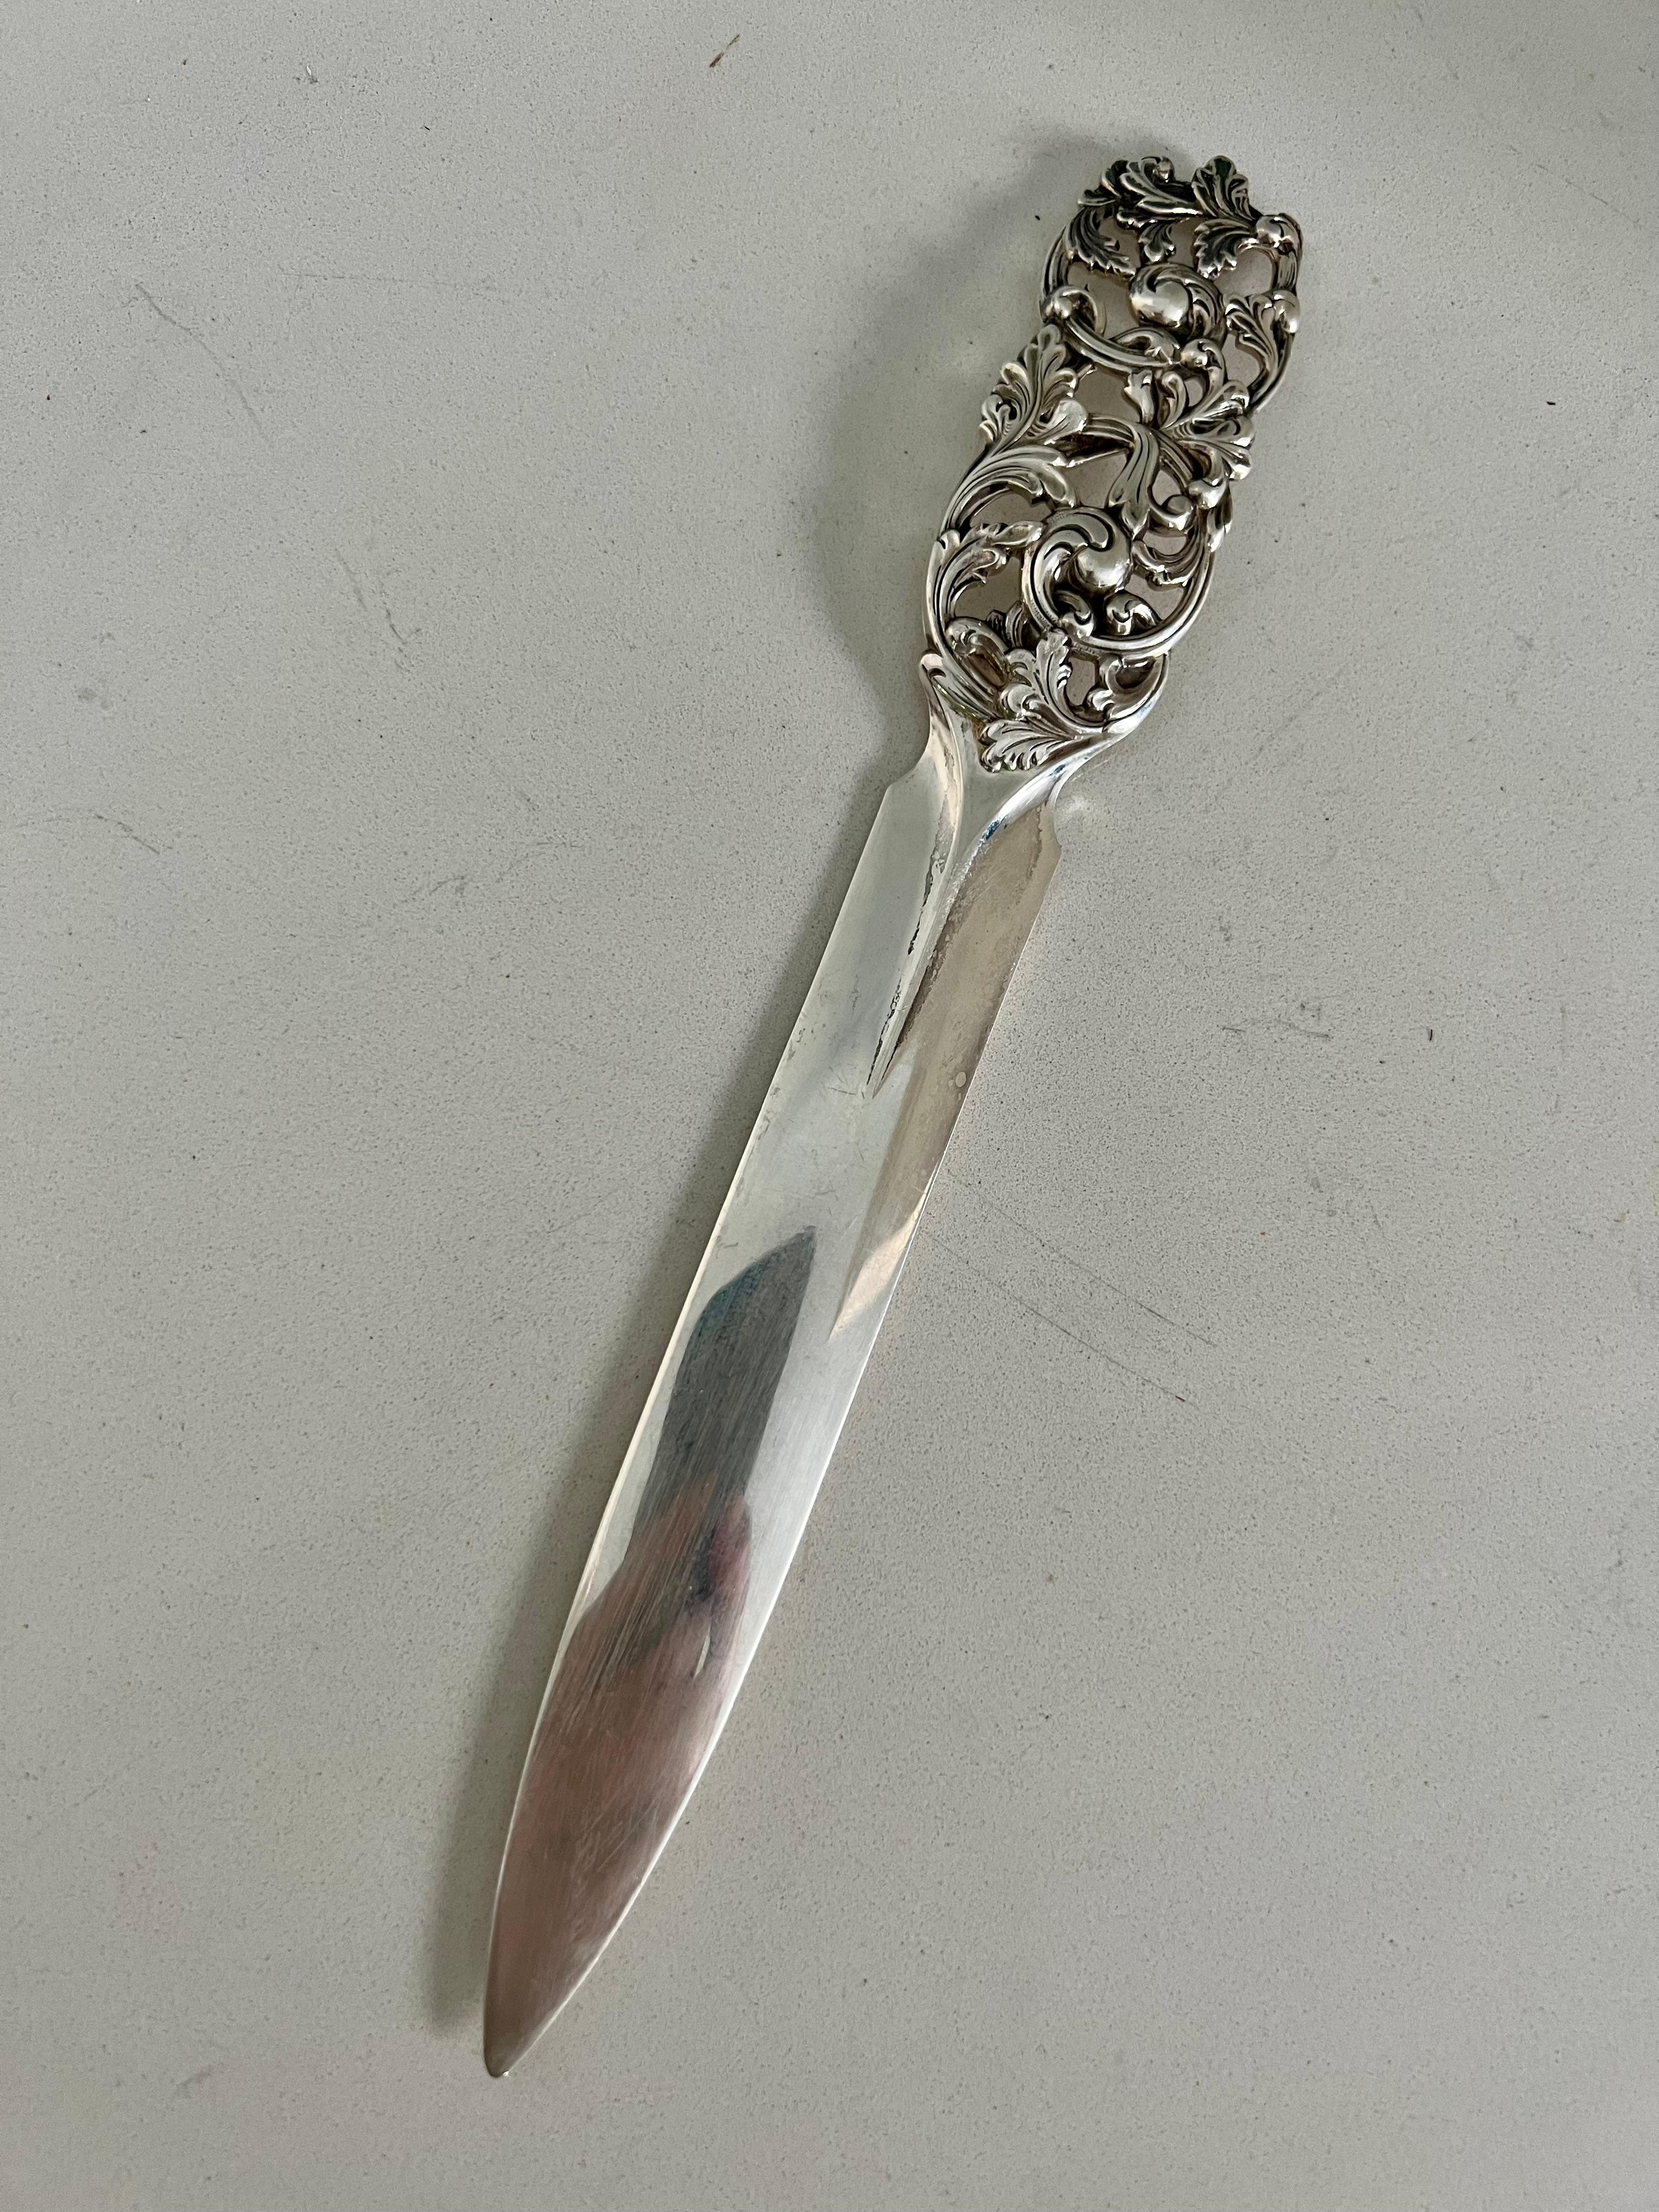 Antique Scandinavian sterling silver letter opener, dated 1825. Signed by R. Elvesæter. 

Substantial and heavy, this Norwegian folk-art inspired letter opener features an ornate leaf and ribbon detail. It is polished in good condition, and will